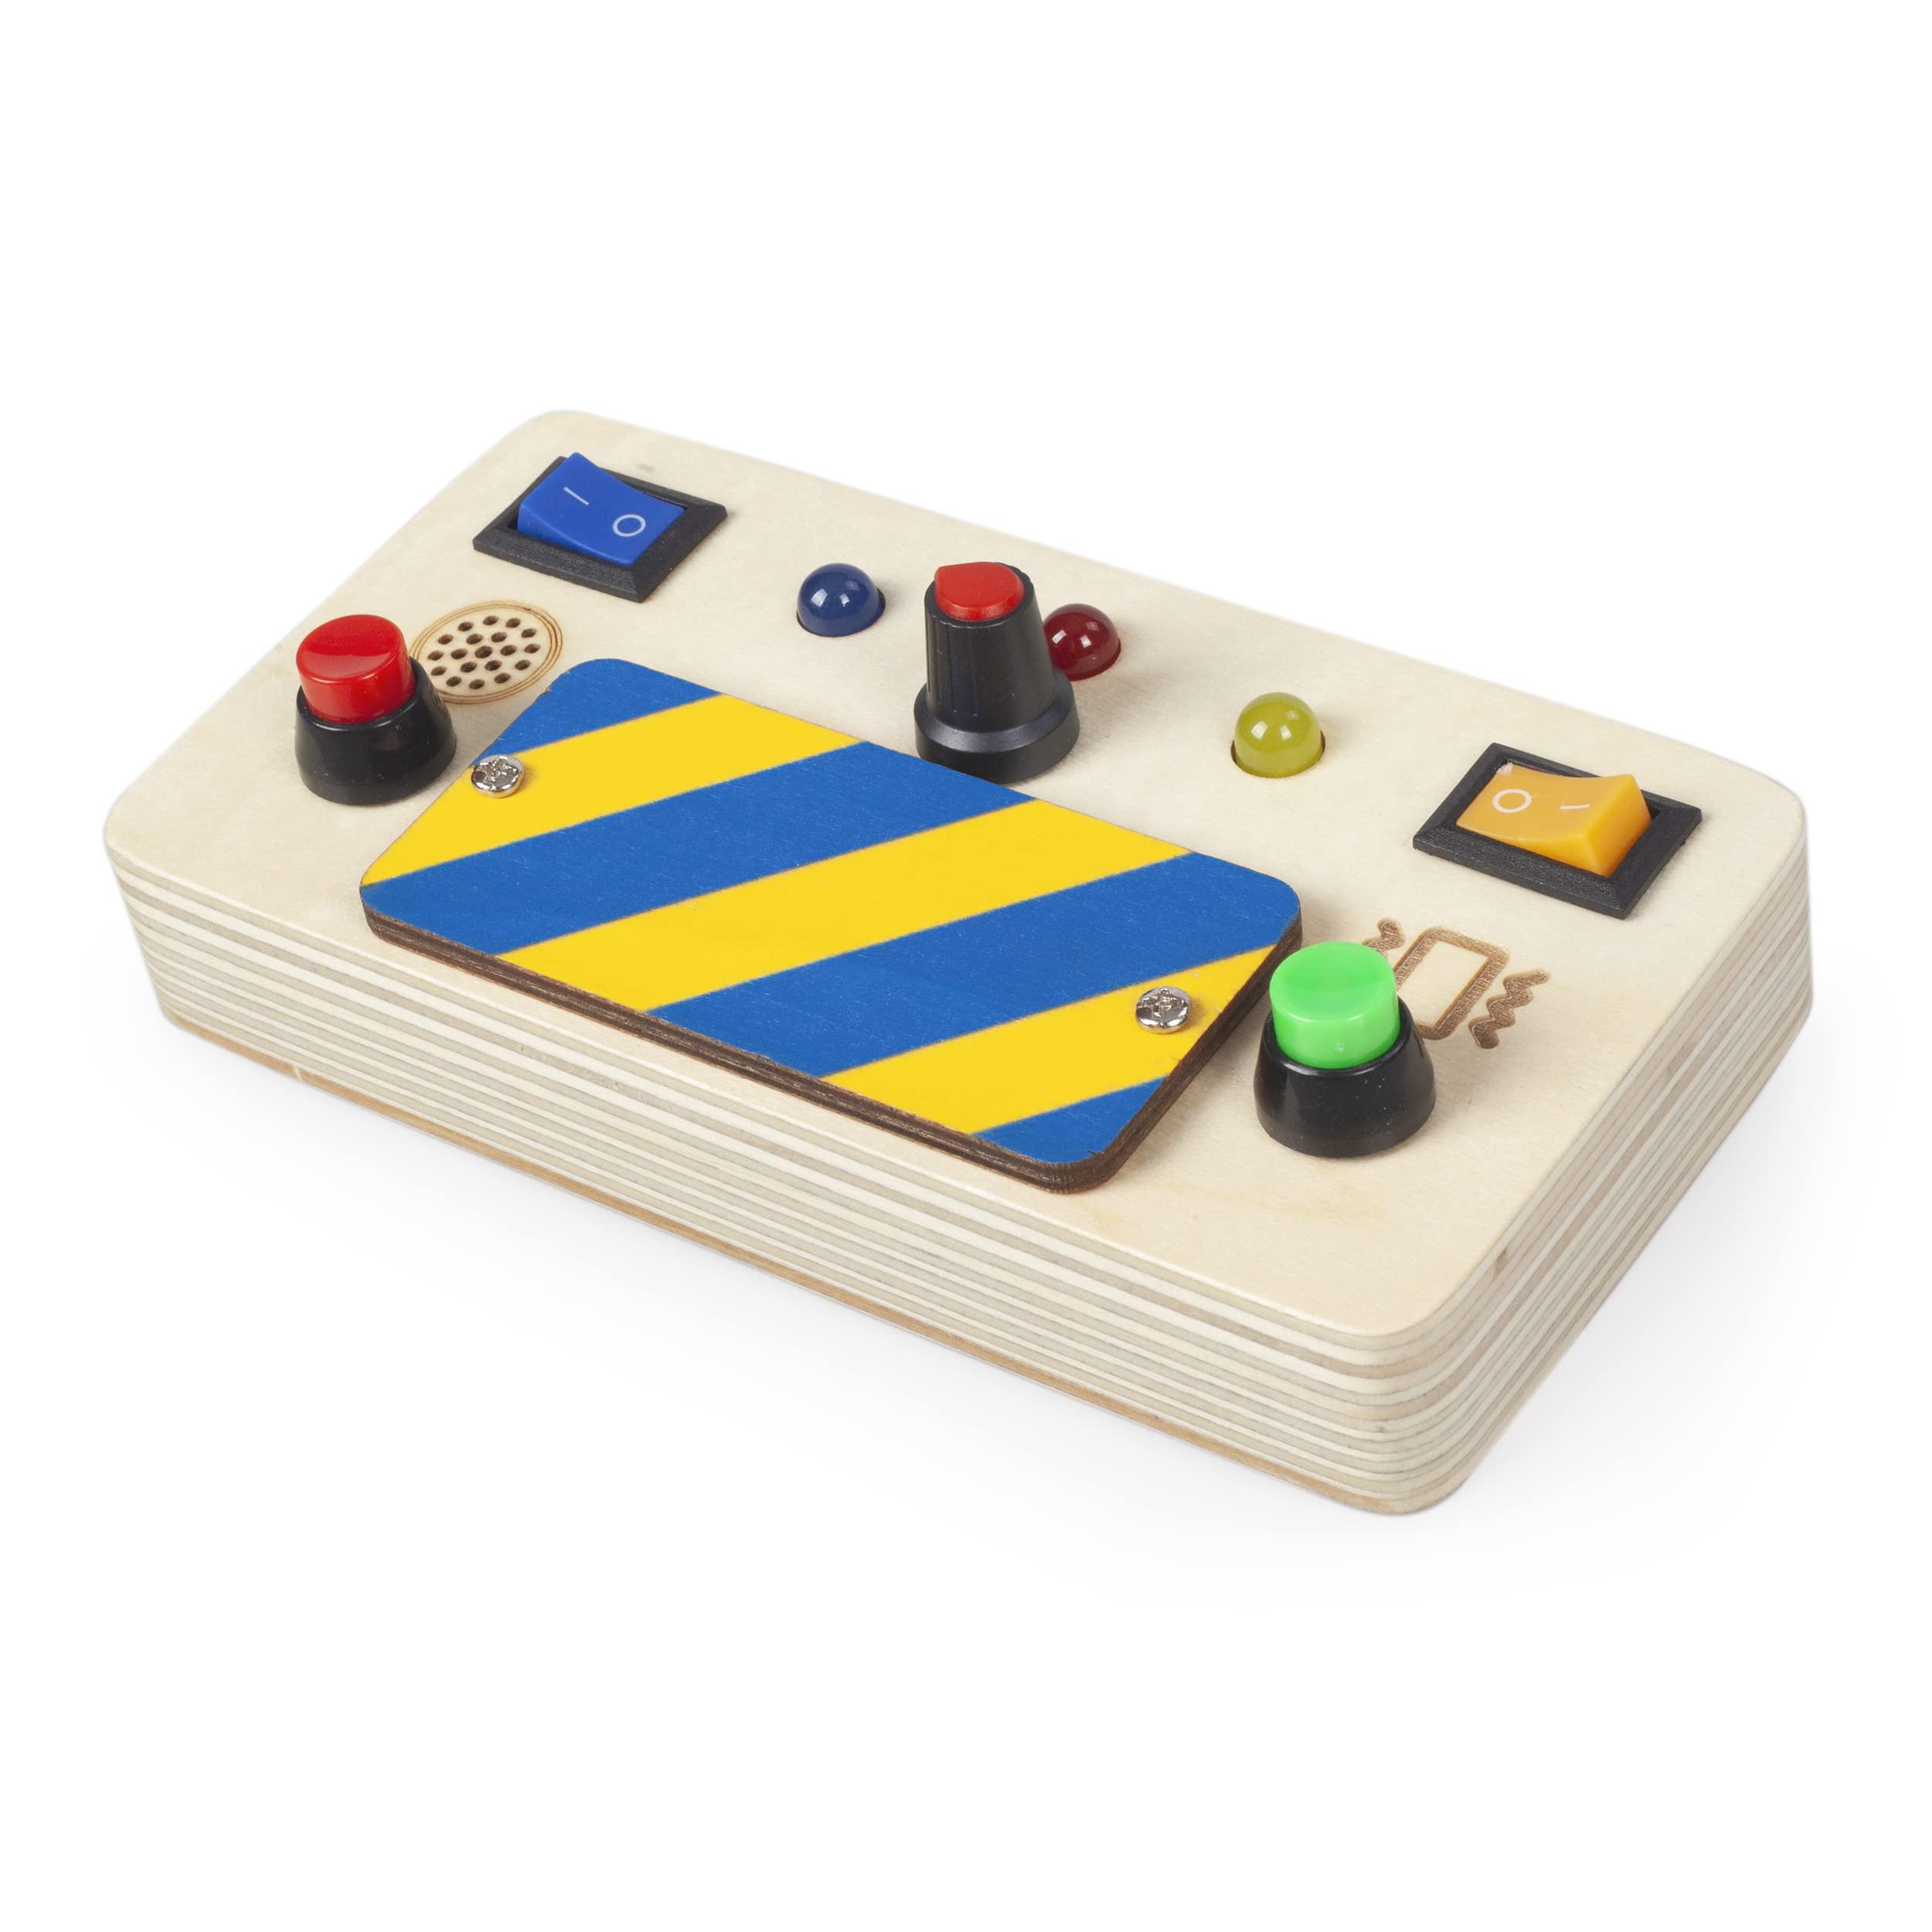 vet models montessori busy board light switch toy wooden sensory toys for toddlers activity board switch box spaceship contro